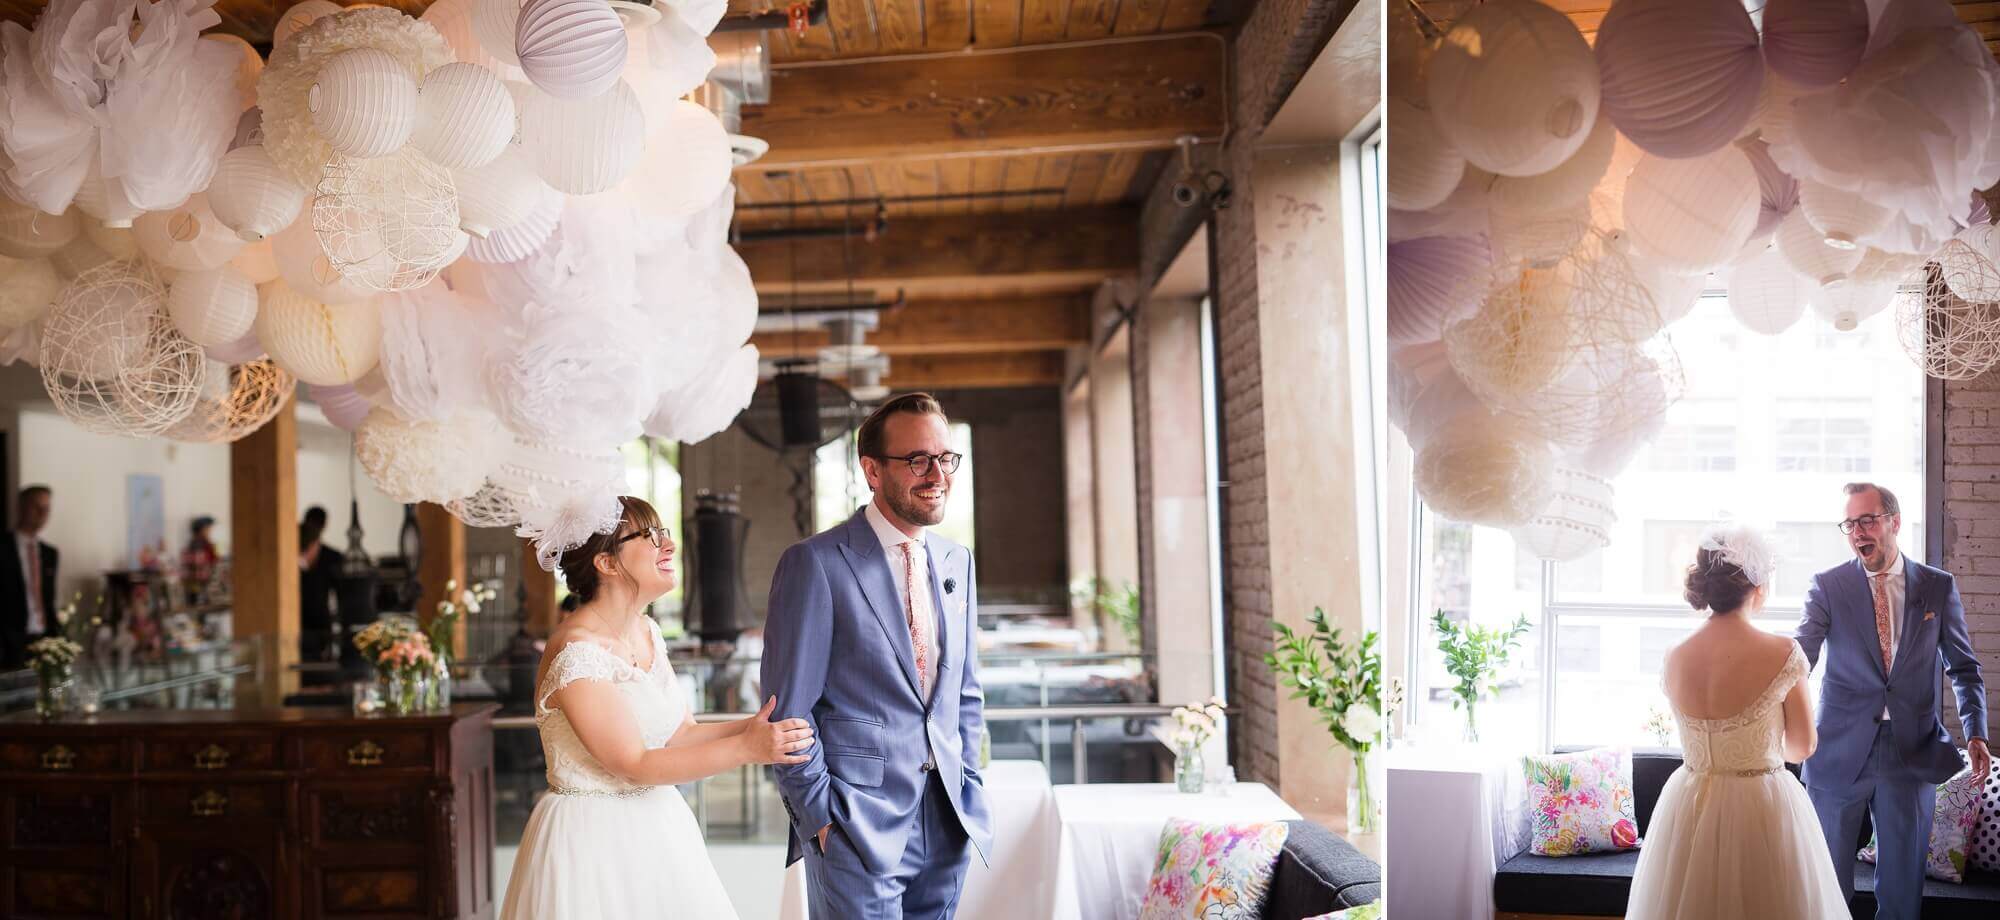 The bride and groom surrounded by their DIY decors, seeing each other for the first time at Hotel Ocho, Toronto